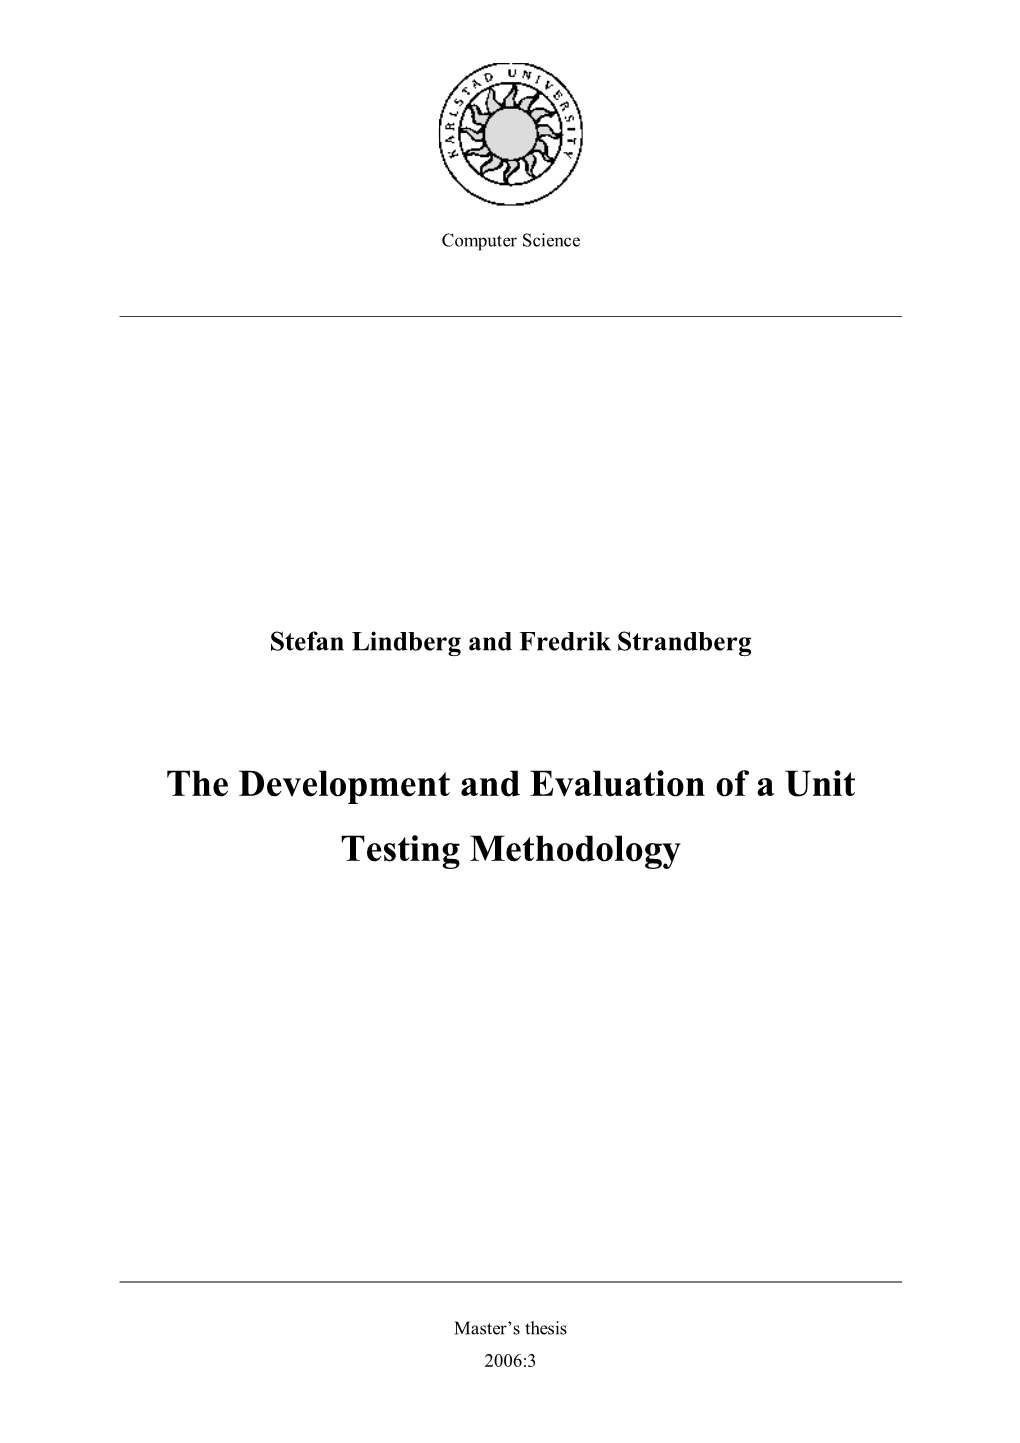 The Development and Evaluation of a Unit Testing Methodology